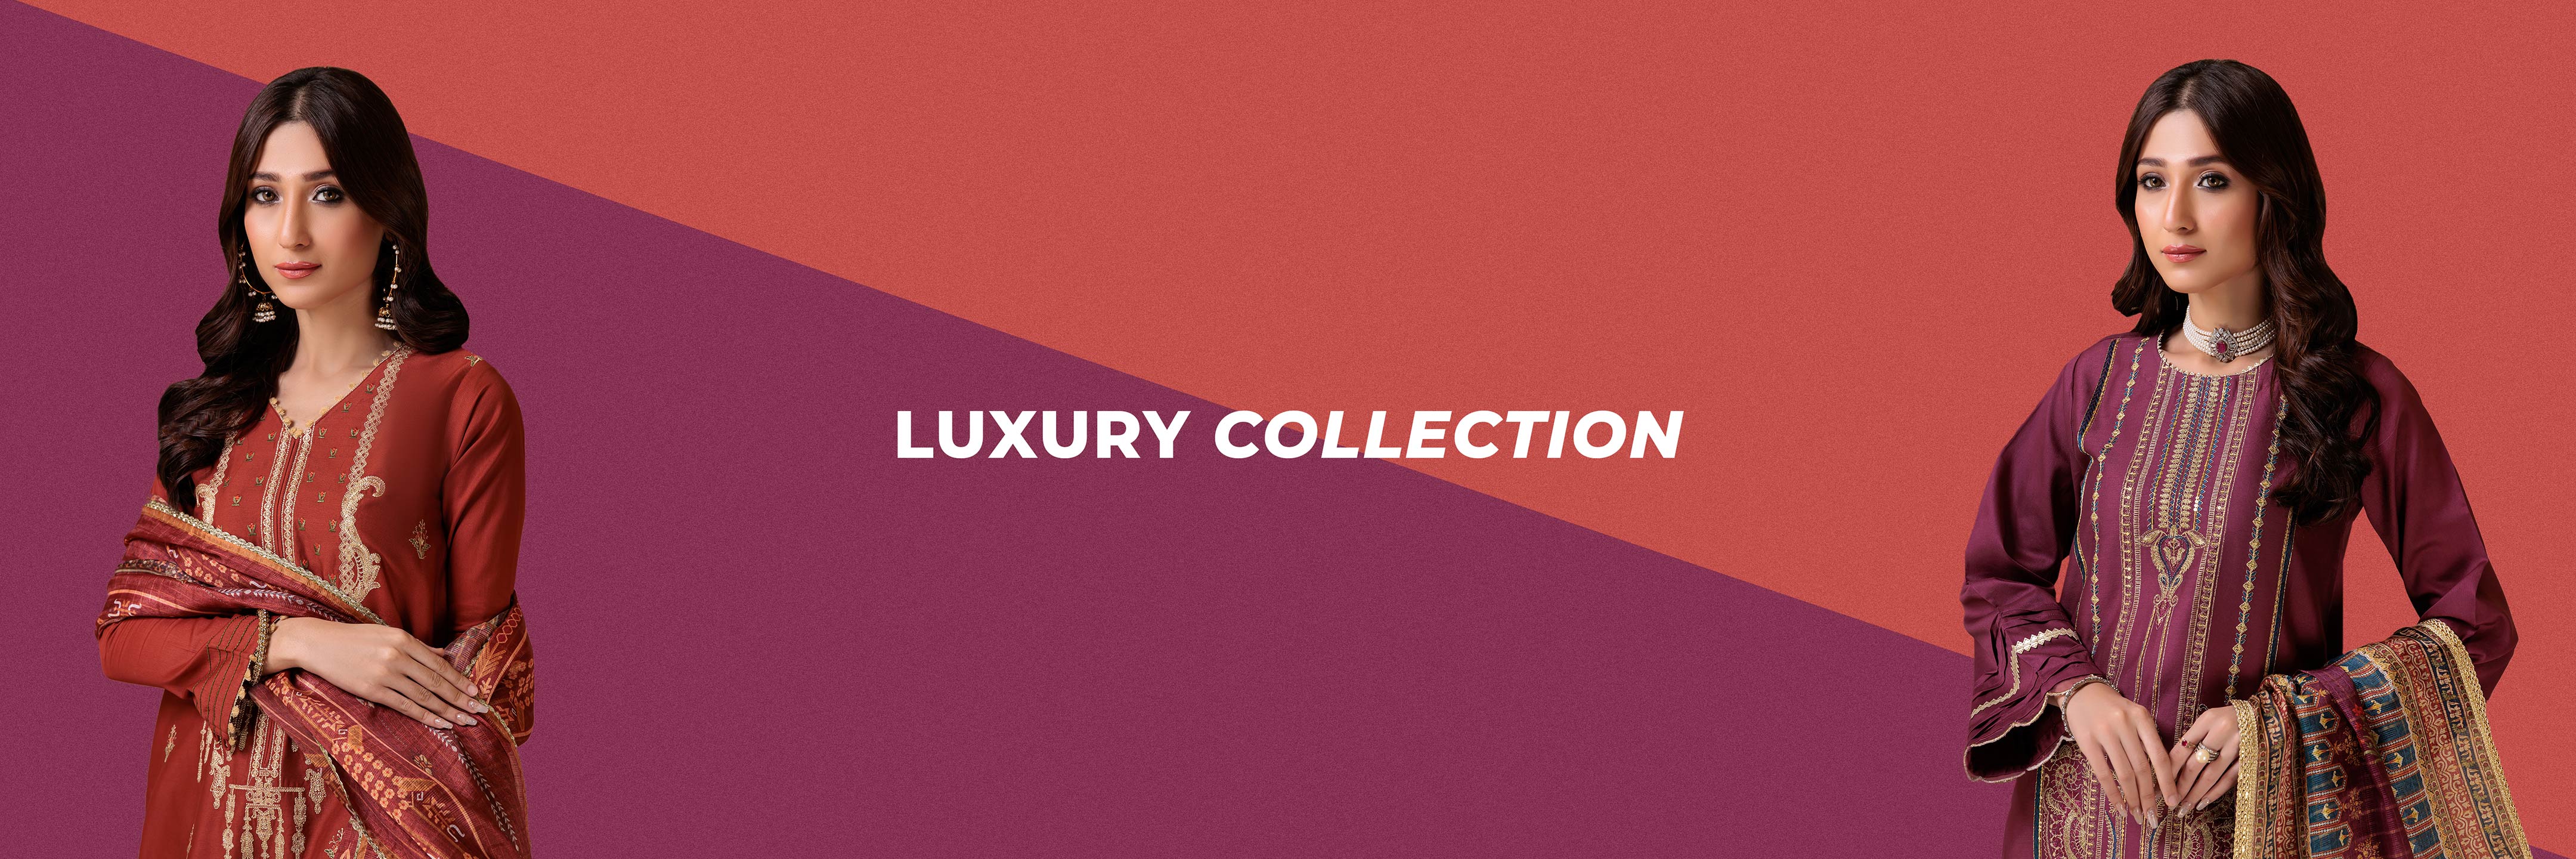 luxury collection